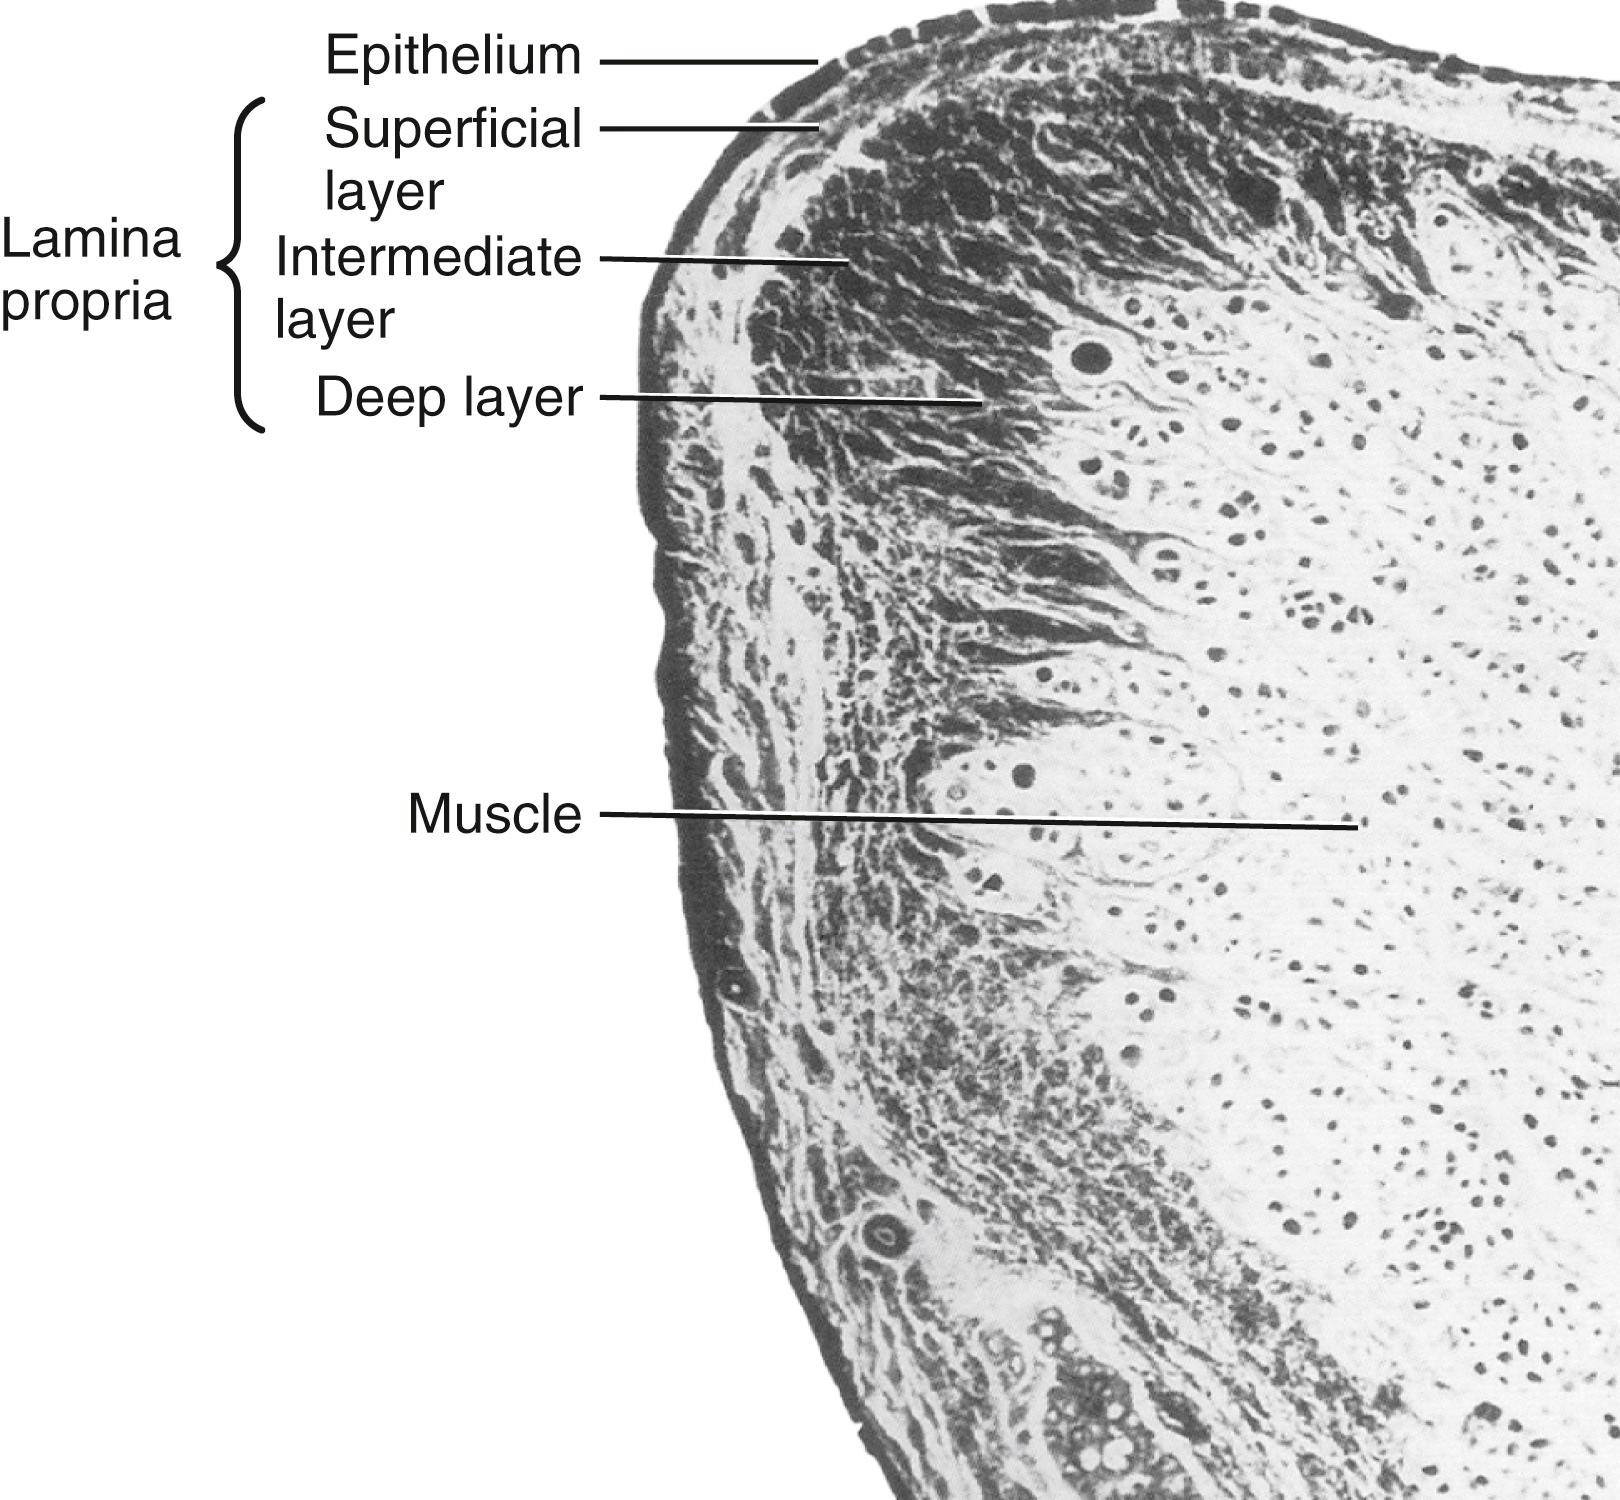 Fig. 2.1, Cross-sectional view of a vocal fold demonstrating layers of the vocal fold lamina propria.